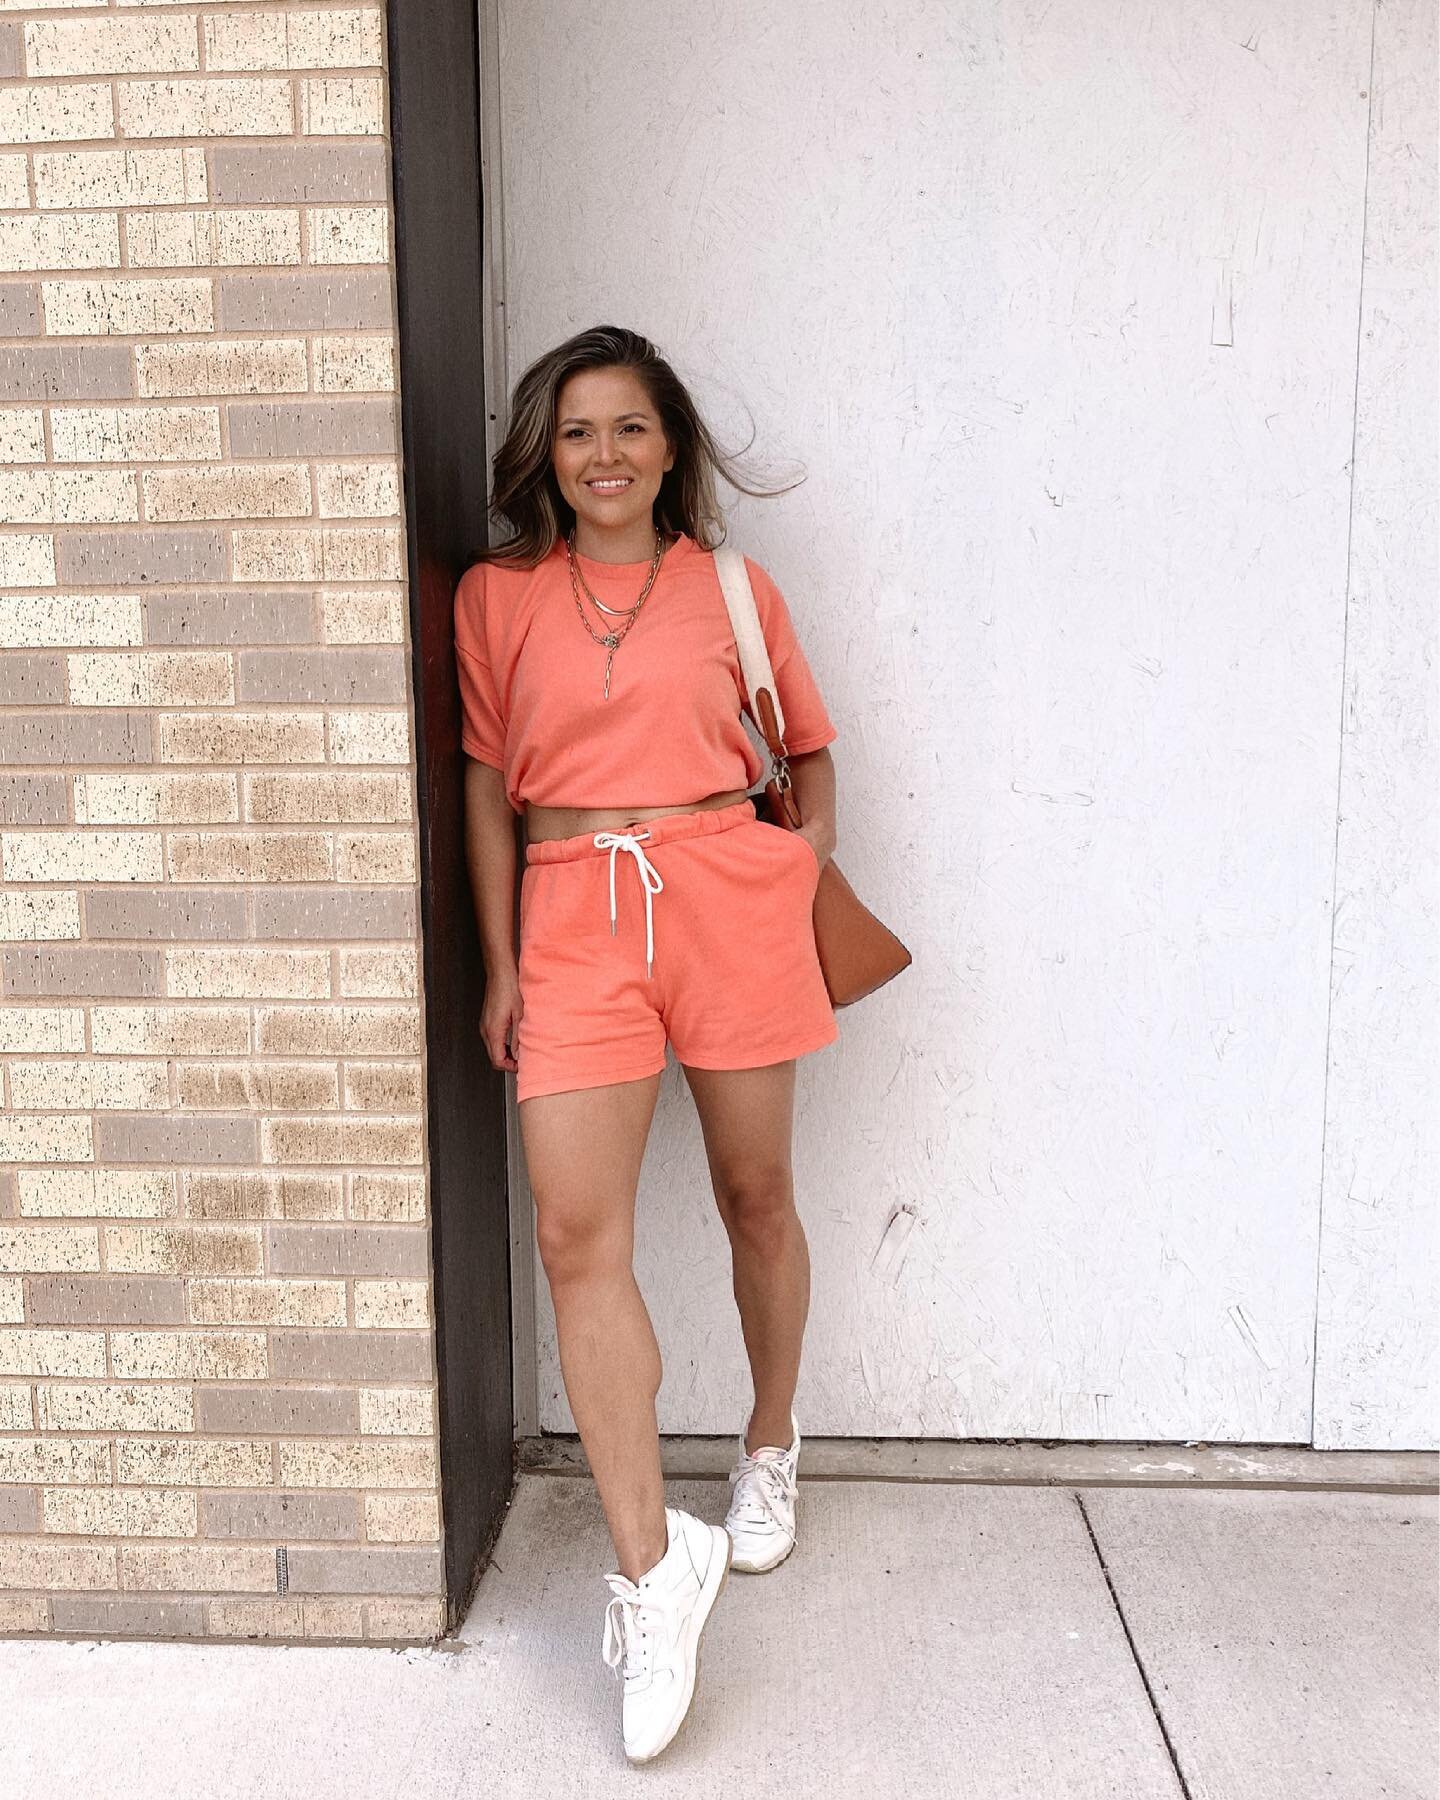 Summertime color 🍑🧡Also, this lounge set for the summertime is lovely.

http://liketk.it/3jdaC #liketkit @liketoknow.it #LTKunder50 #LTKstyletip #LTKshoecrush  #peachy #summerstyle #loungewear #petitegirl #petitefashion #comfyoutfit #affordablestyl